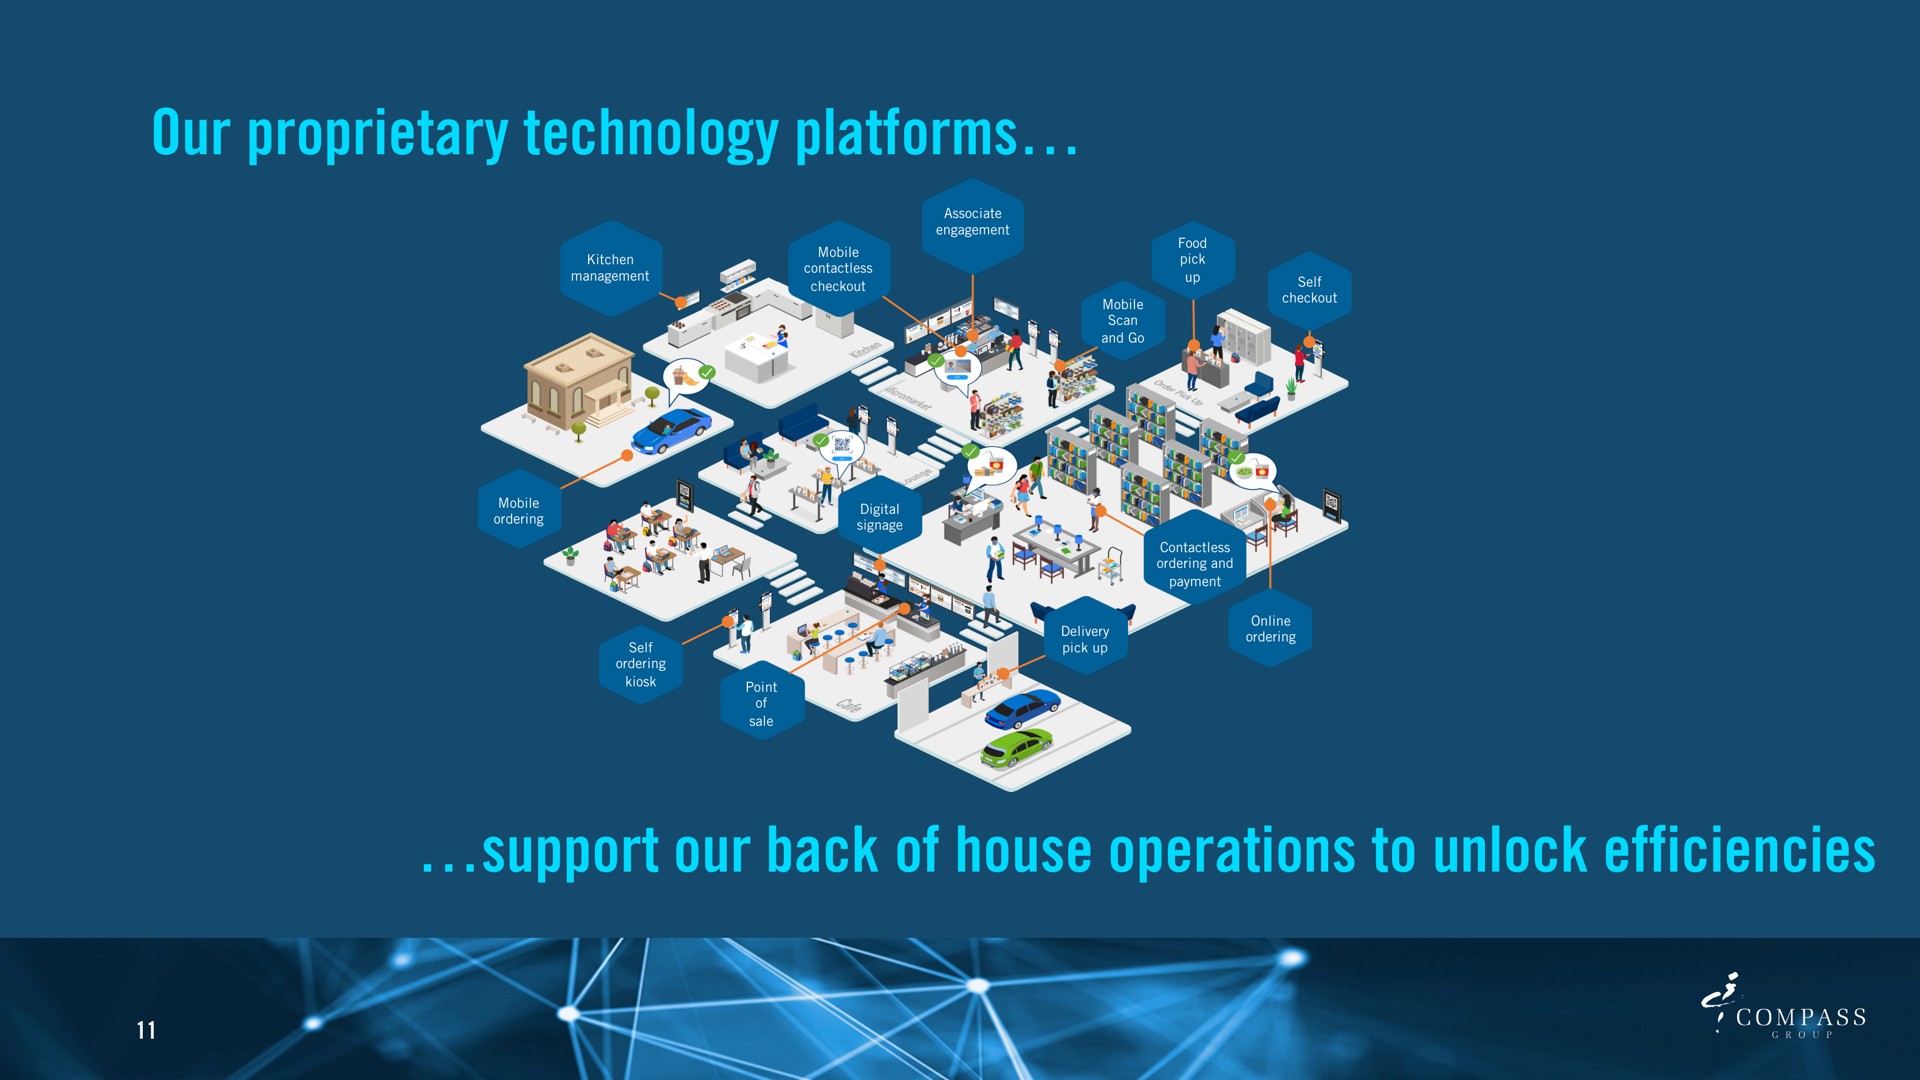 our proprietary technology platforms support our back of house operations to unlock efficiencies tae a | Compass Group